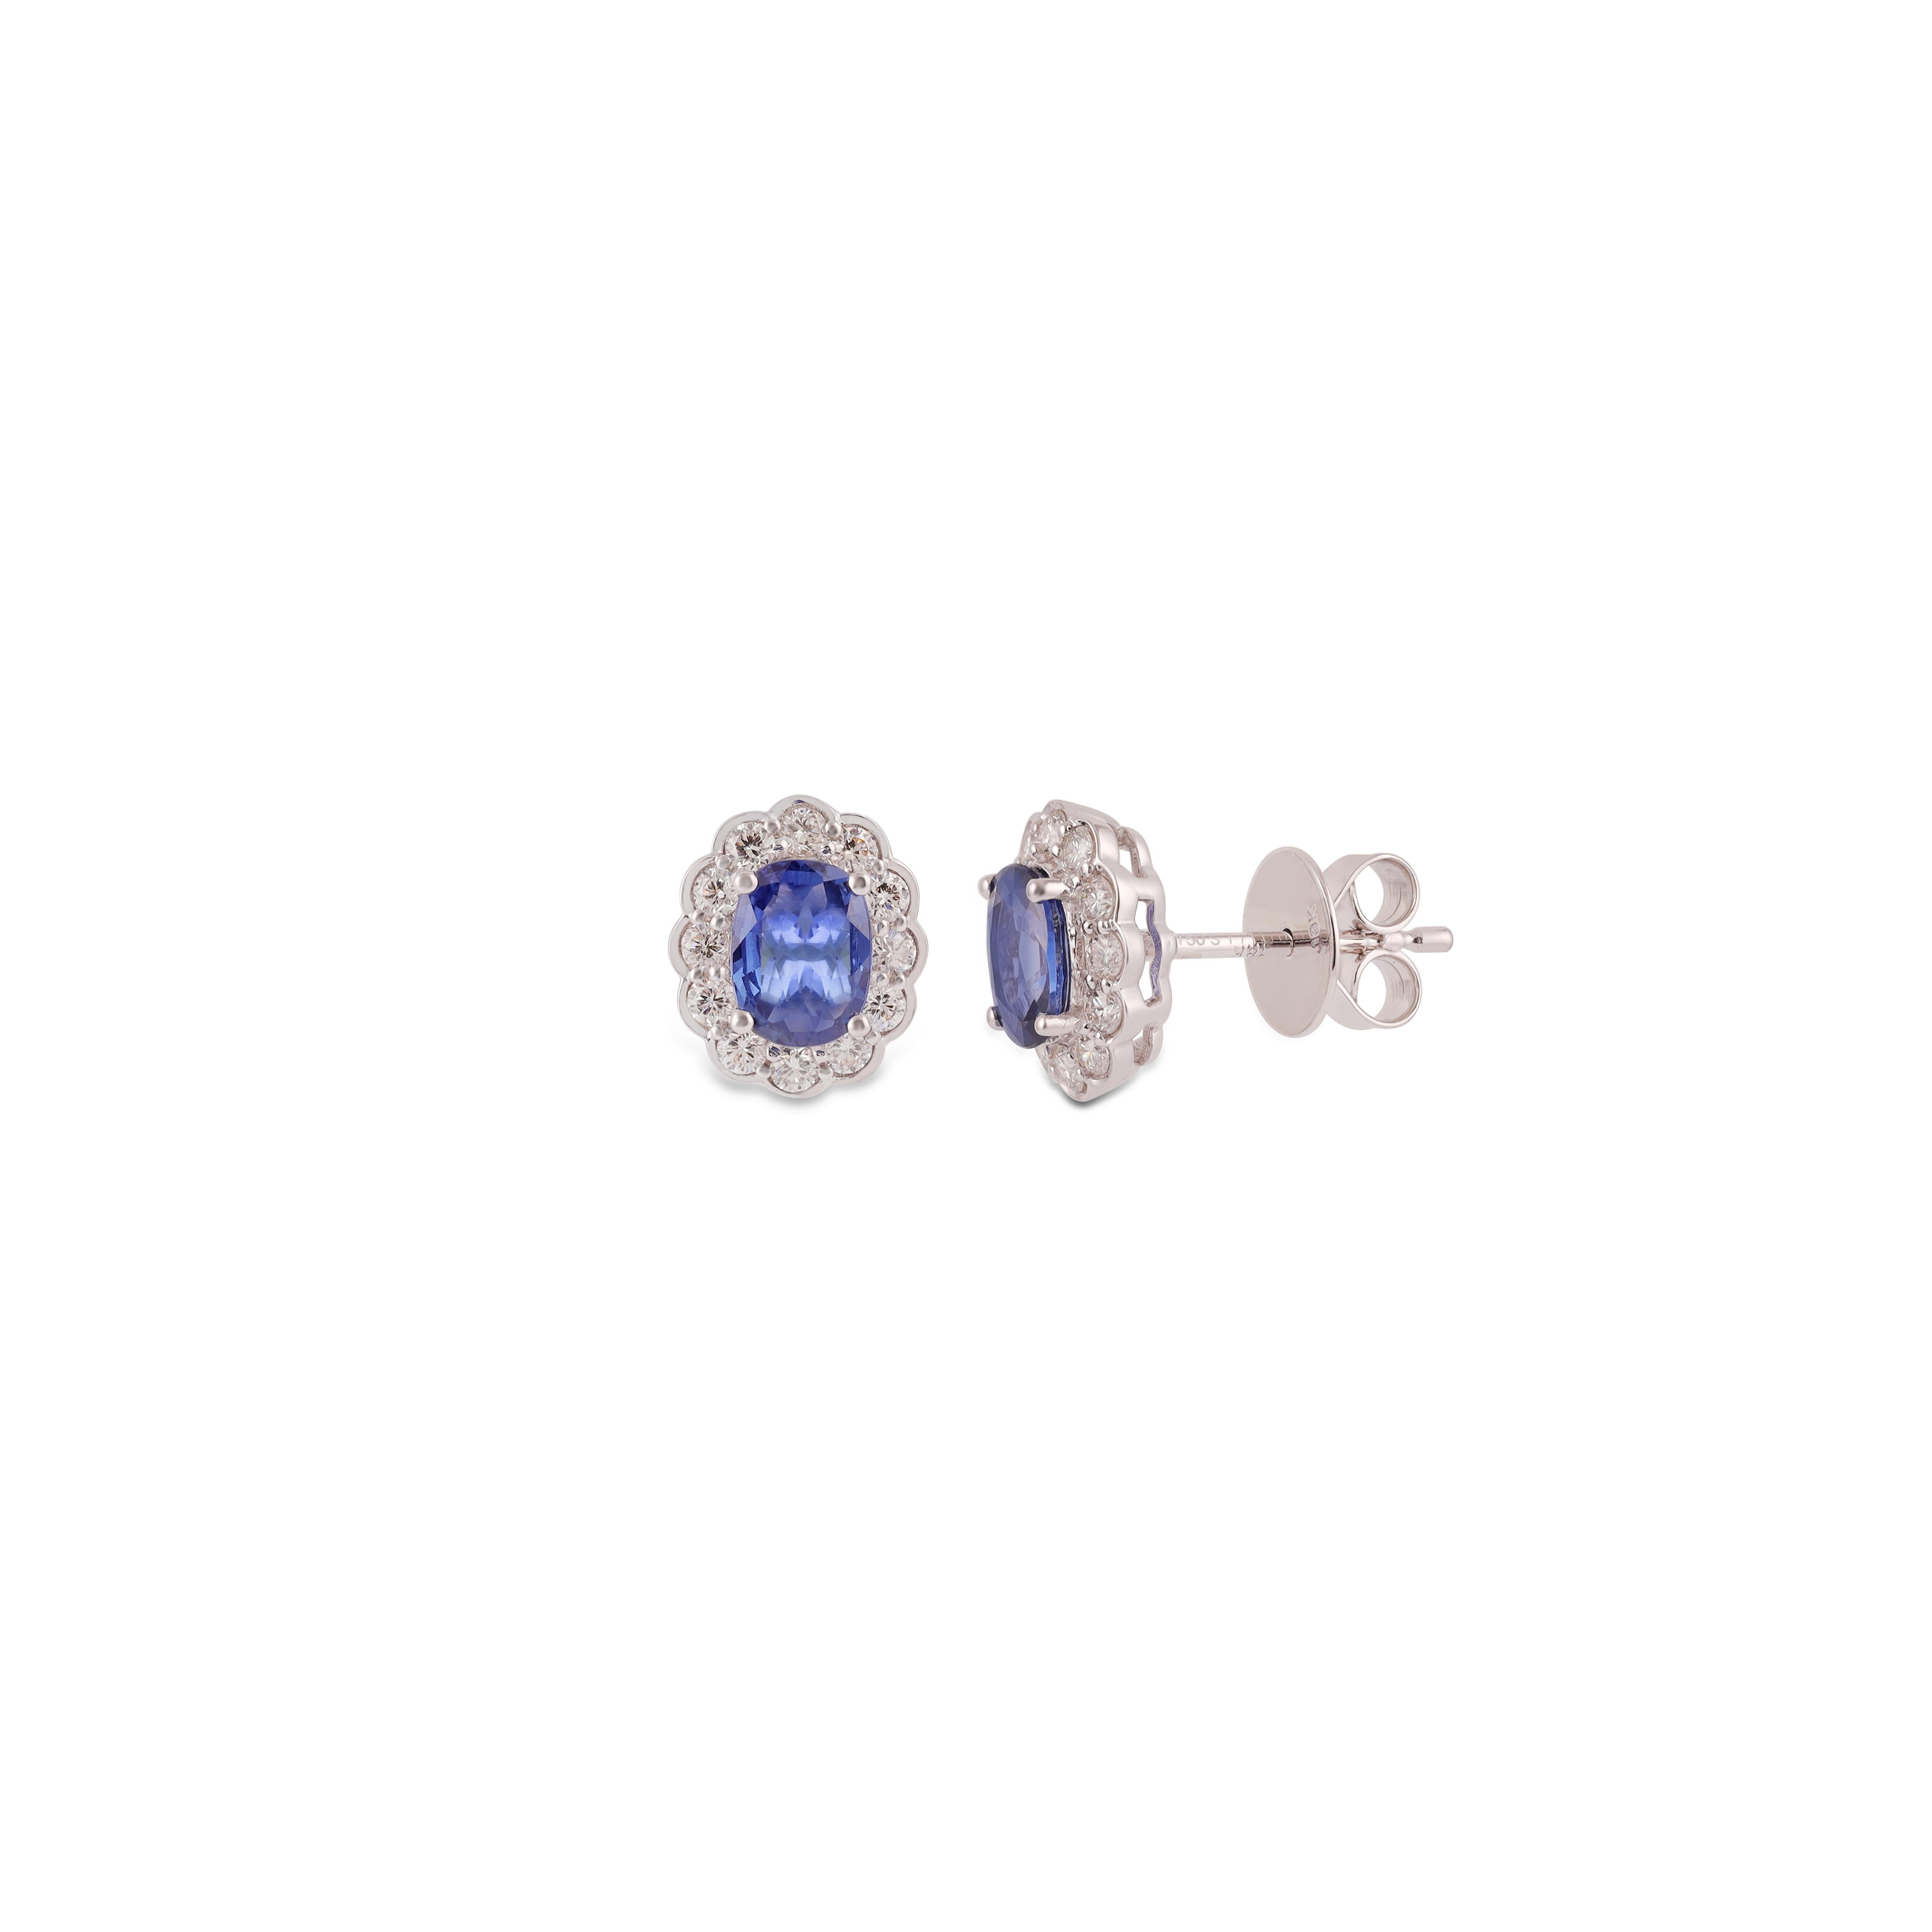 1.71  Carat Blue Sapphire & Diamond Earrings Studs in 18k White Gold . In New Condition For Sale In Jaipur, Rajasthan